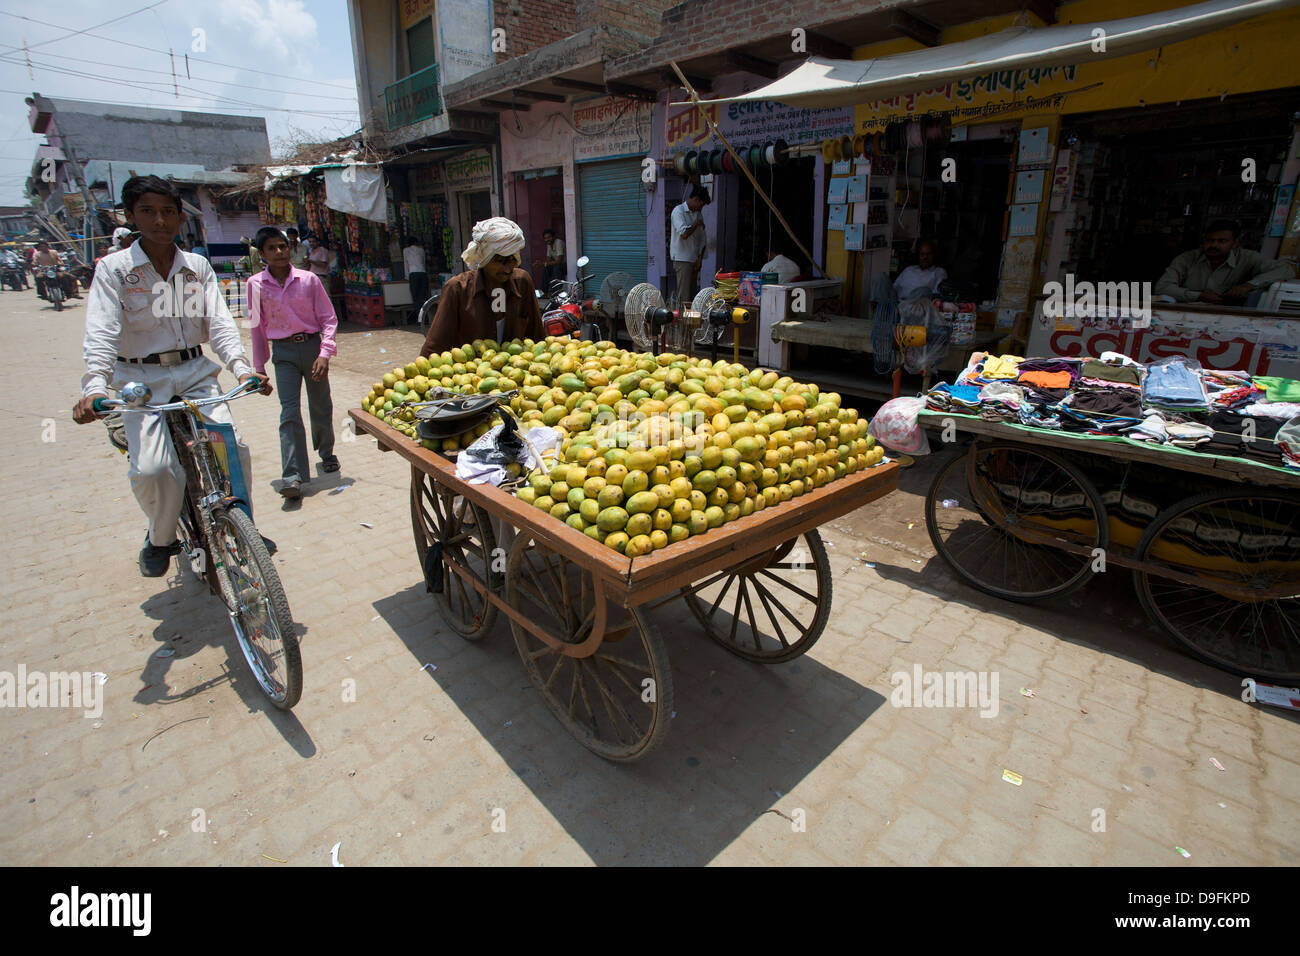 A young male pushes a large barrow of apples through a market street in Delhi India. Indian street business. Street trader India Stock Photo